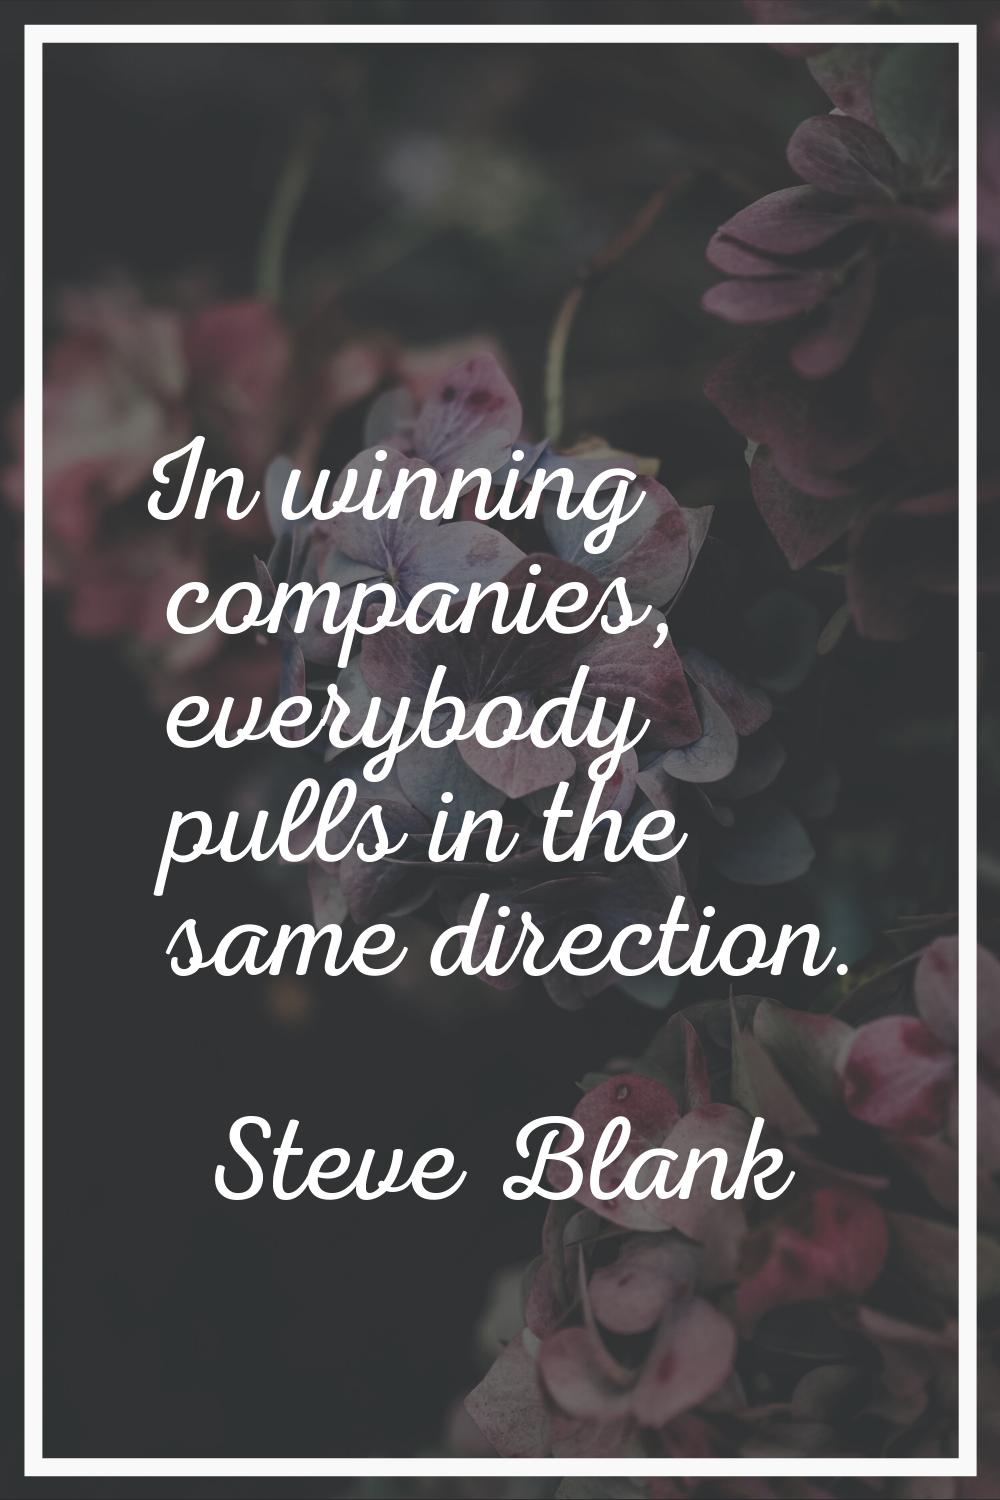 In winning companies, everybody pulls in the same direction.